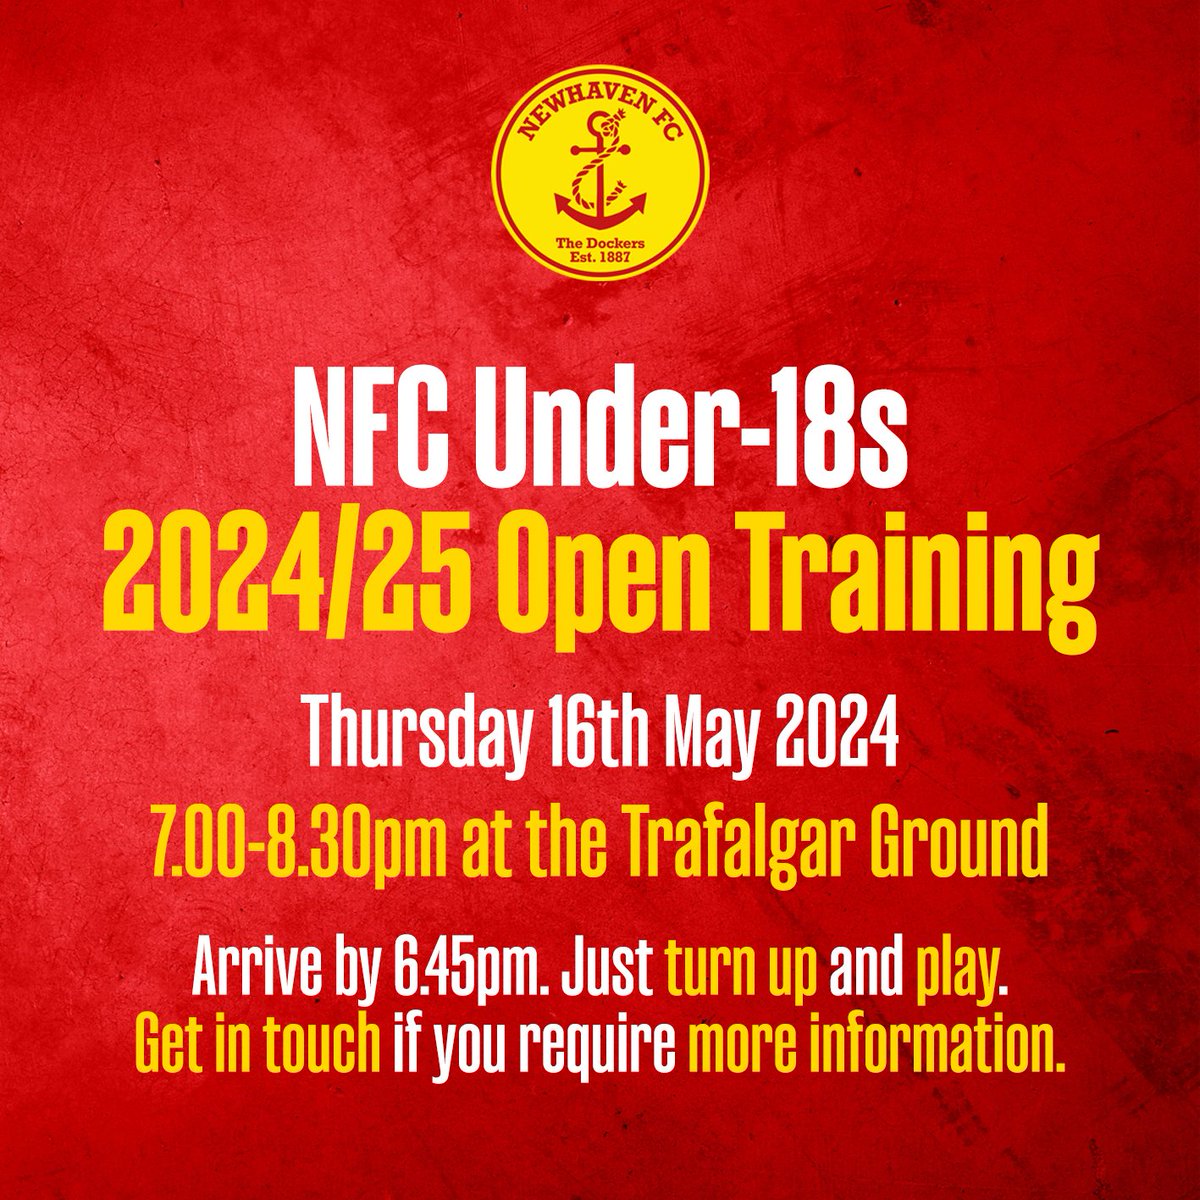 ⚽️ 𝗨𝟭𝟴 𝗢𝗽𝗲𝗻 𝗧𝗿𝗮𝗶𝗻𝗶𝗻𝗴! On Thursday 16th May, we are holding an open training session at Fort Road for any current or new players who wish to play for our Under-18s in 2024/25. No commitment, just turn up and play. Get in touch for more information.